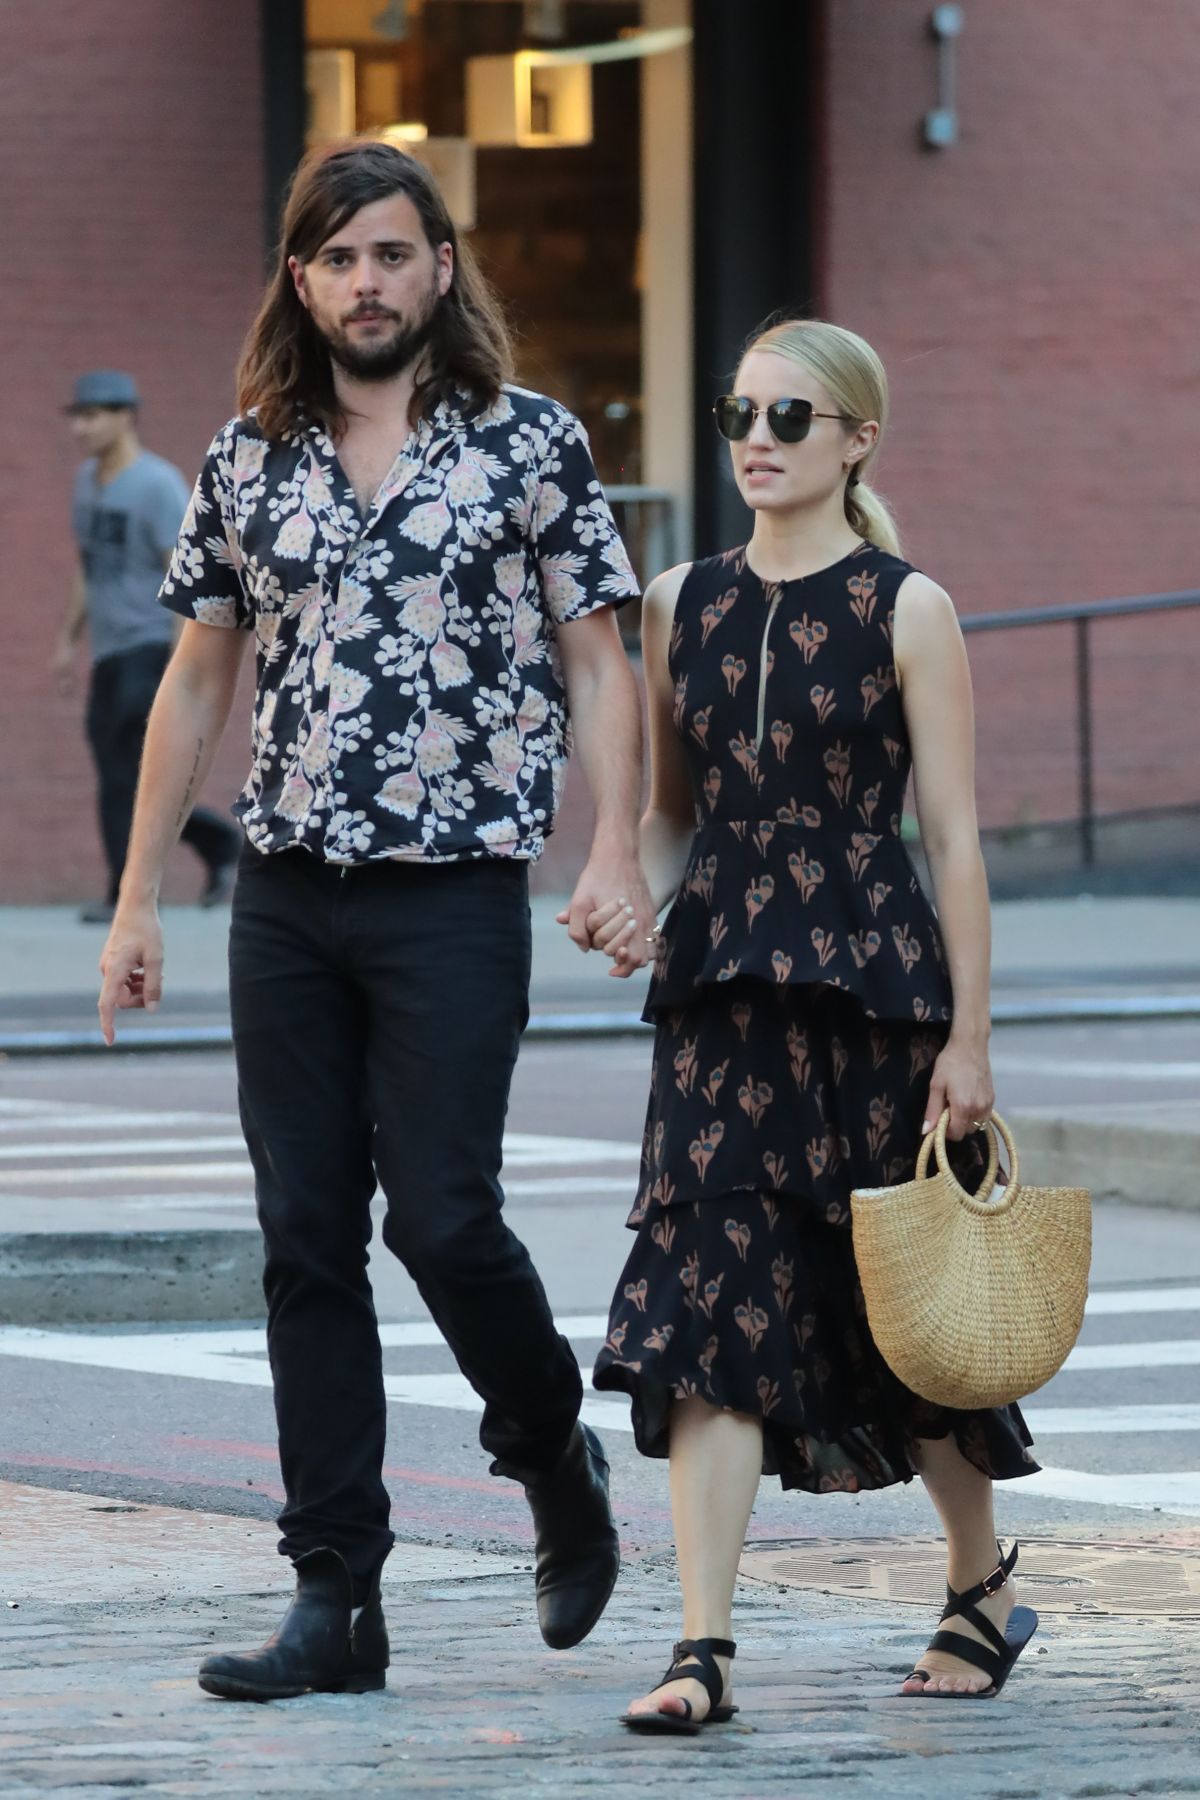 dianna-agron-and-winston-marshall-out-in-new-york-07-09-2018-4.jpg